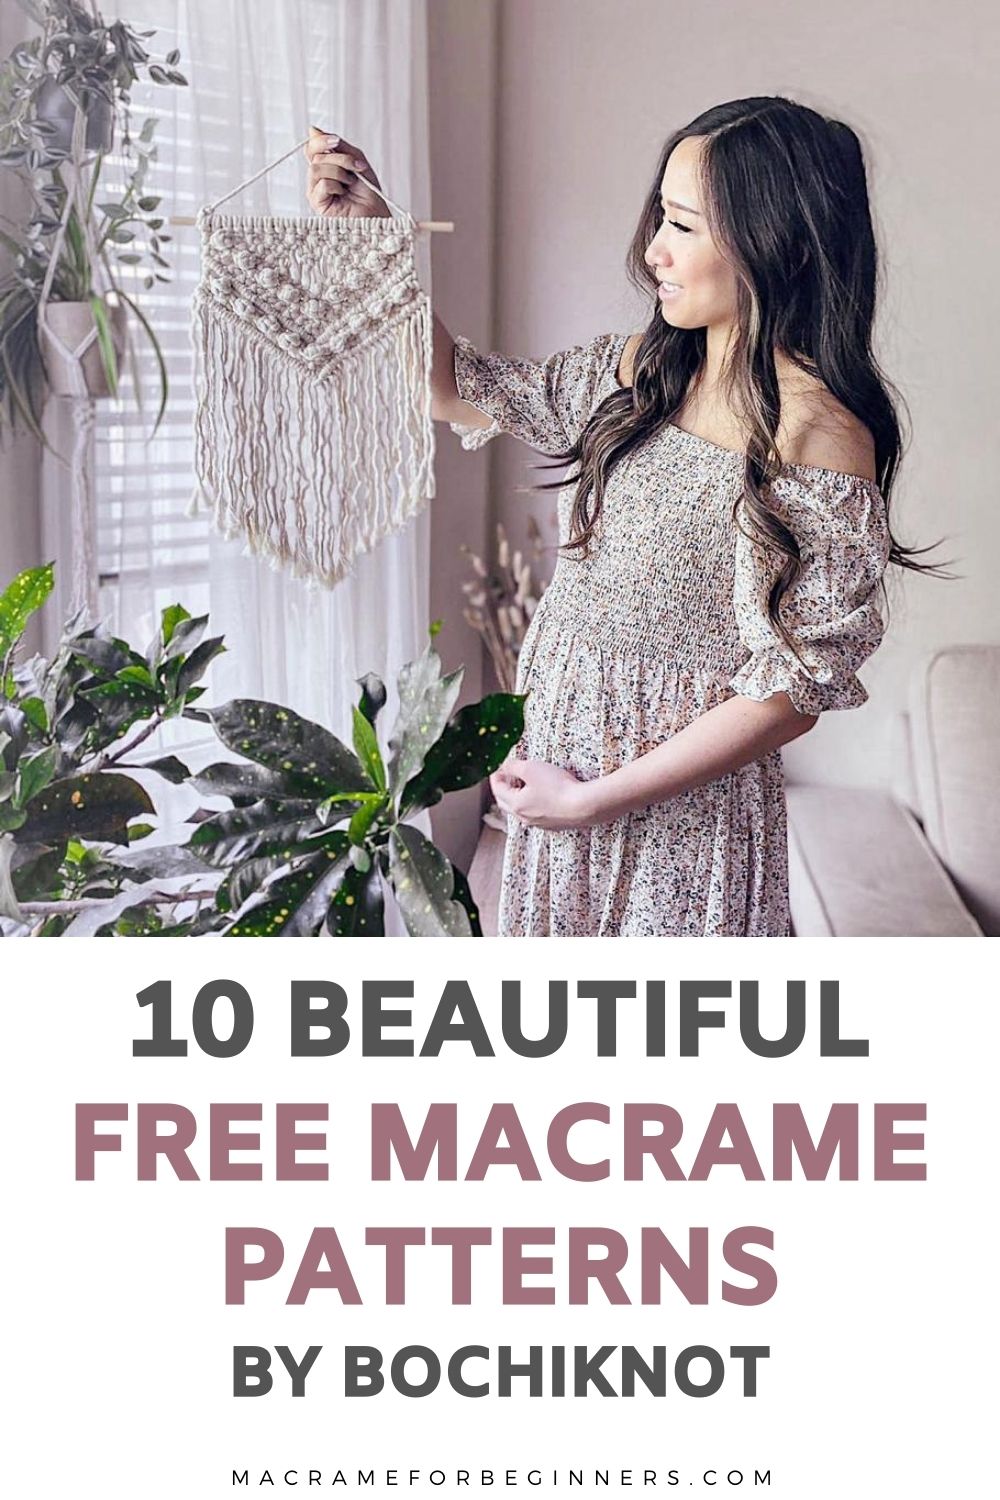 10 Gorgeous Free Macrame Patterns and Video Tutorials by Bochiknot + Interview - Macrame for Beginners 